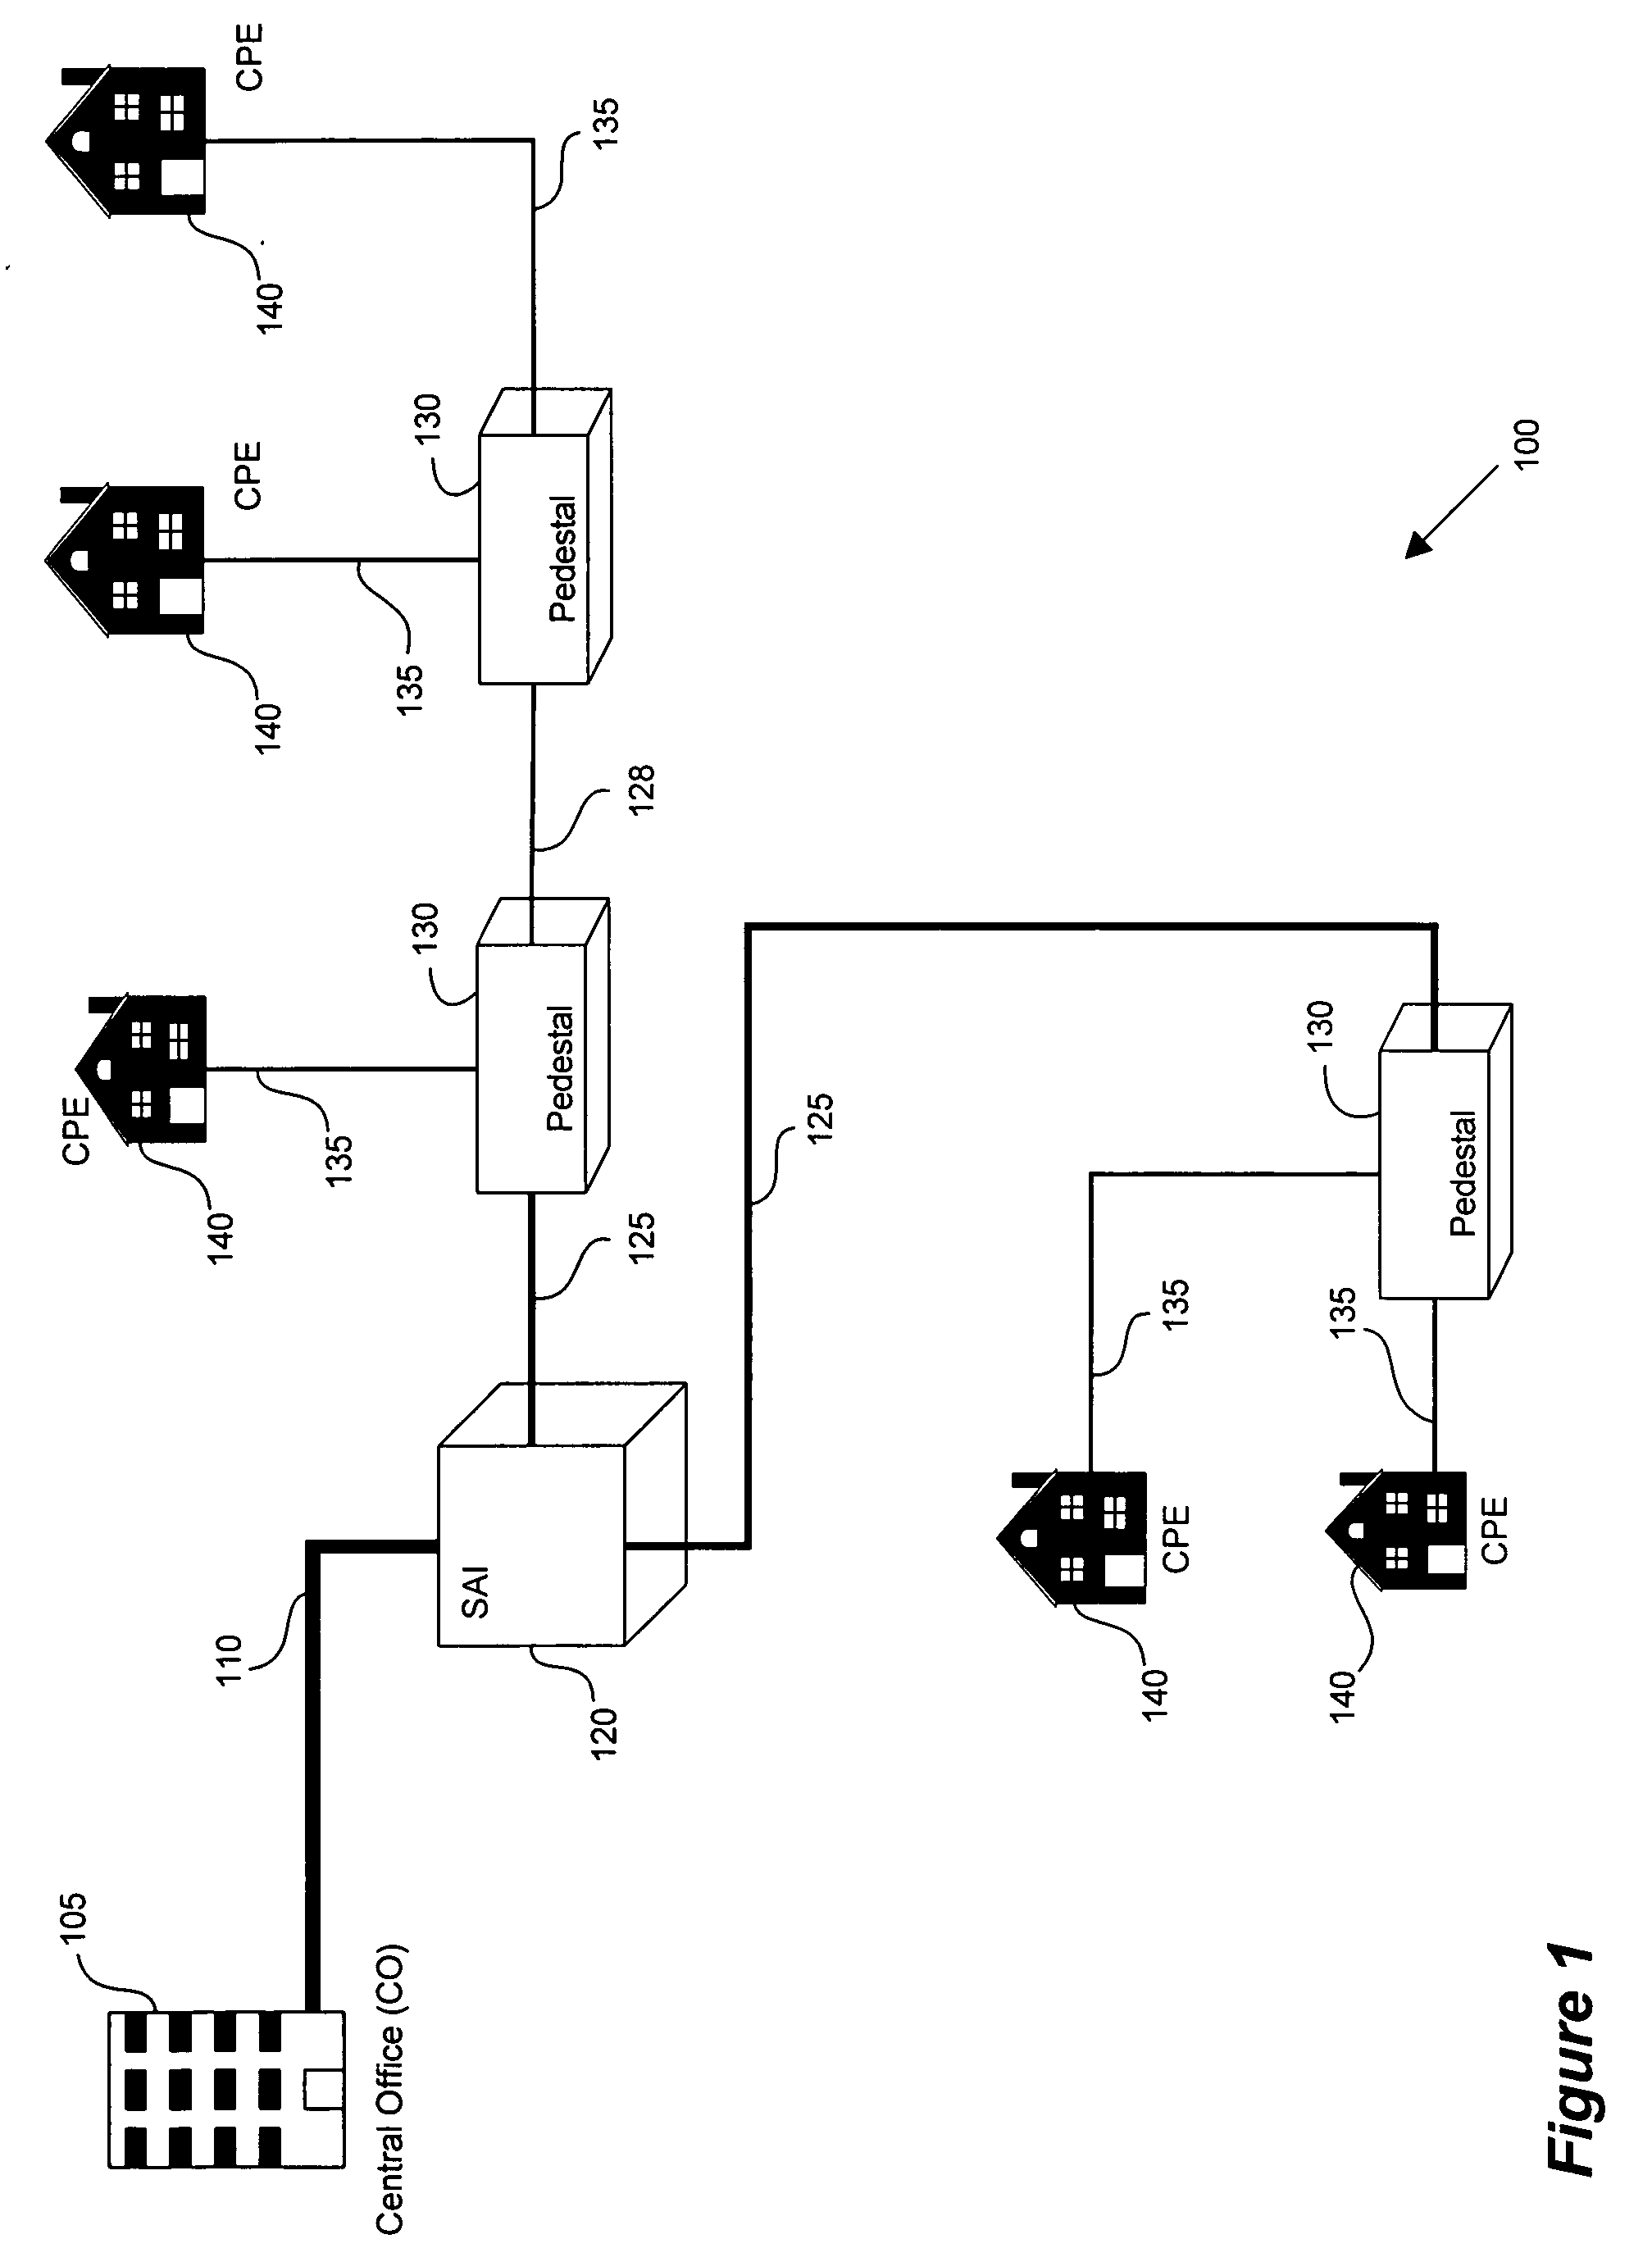 Interference cancellation system